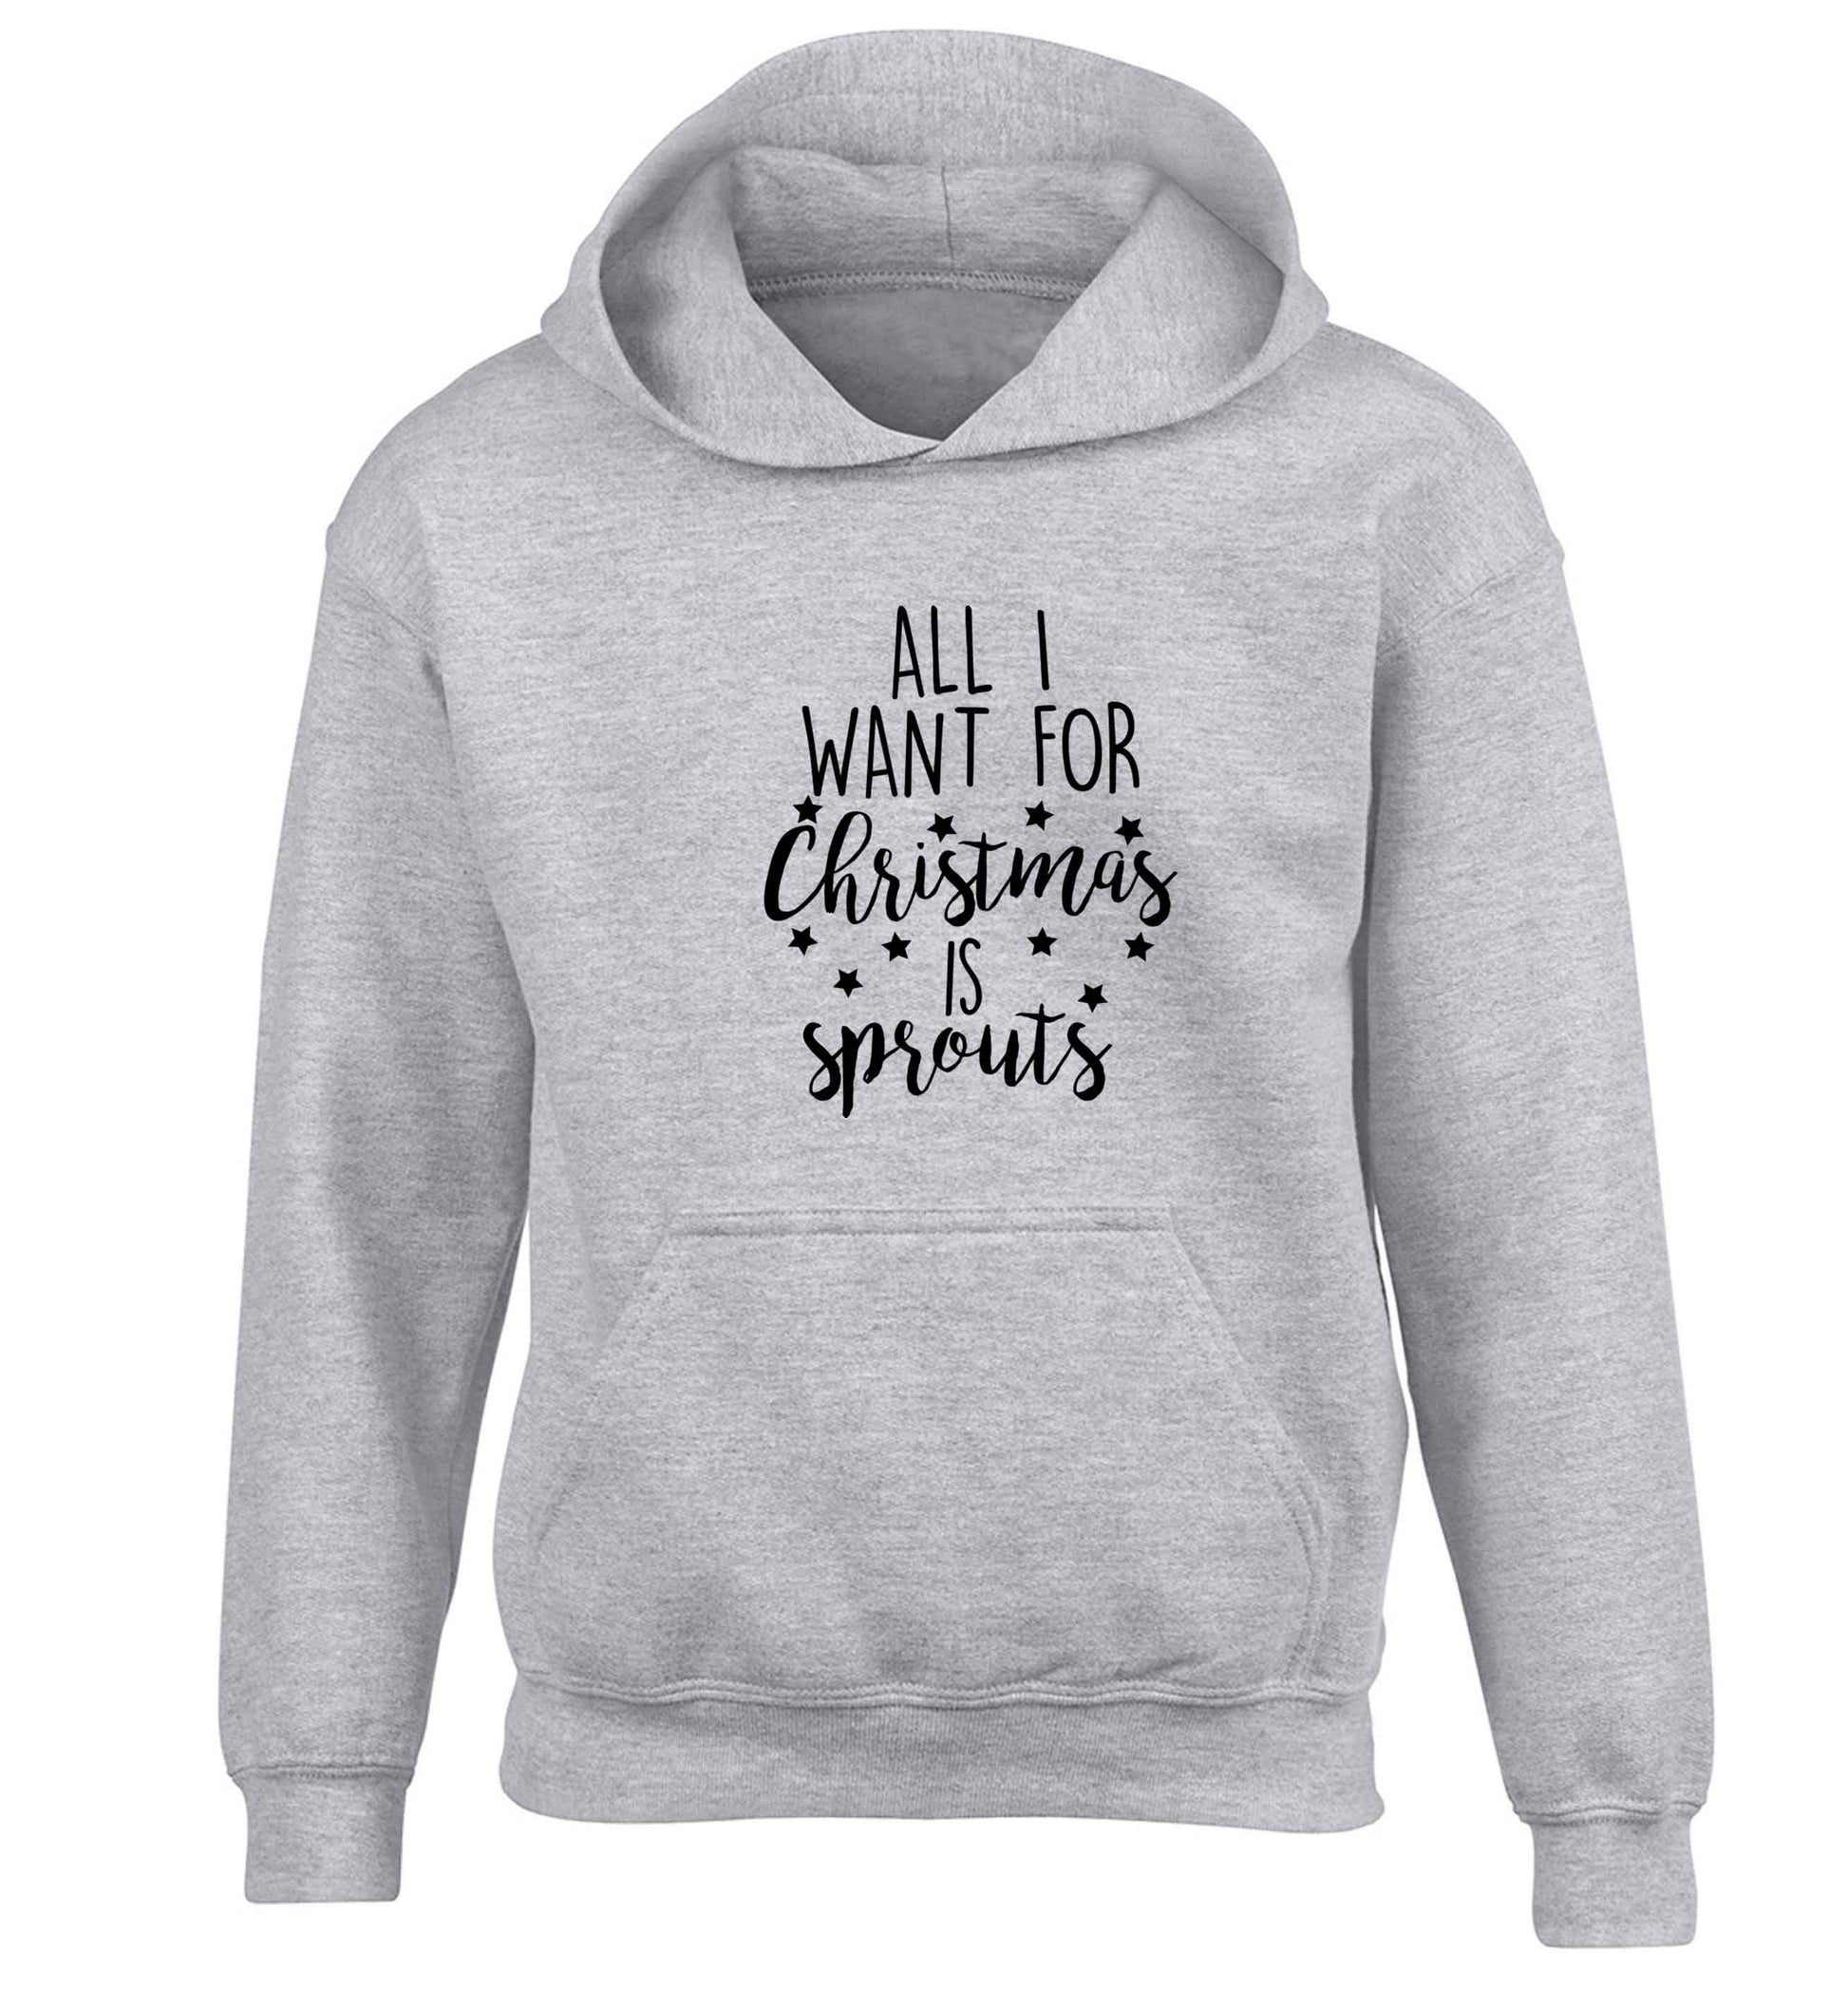 All I want for Christmas is sprouts children's grey hoodie 12-13 Years